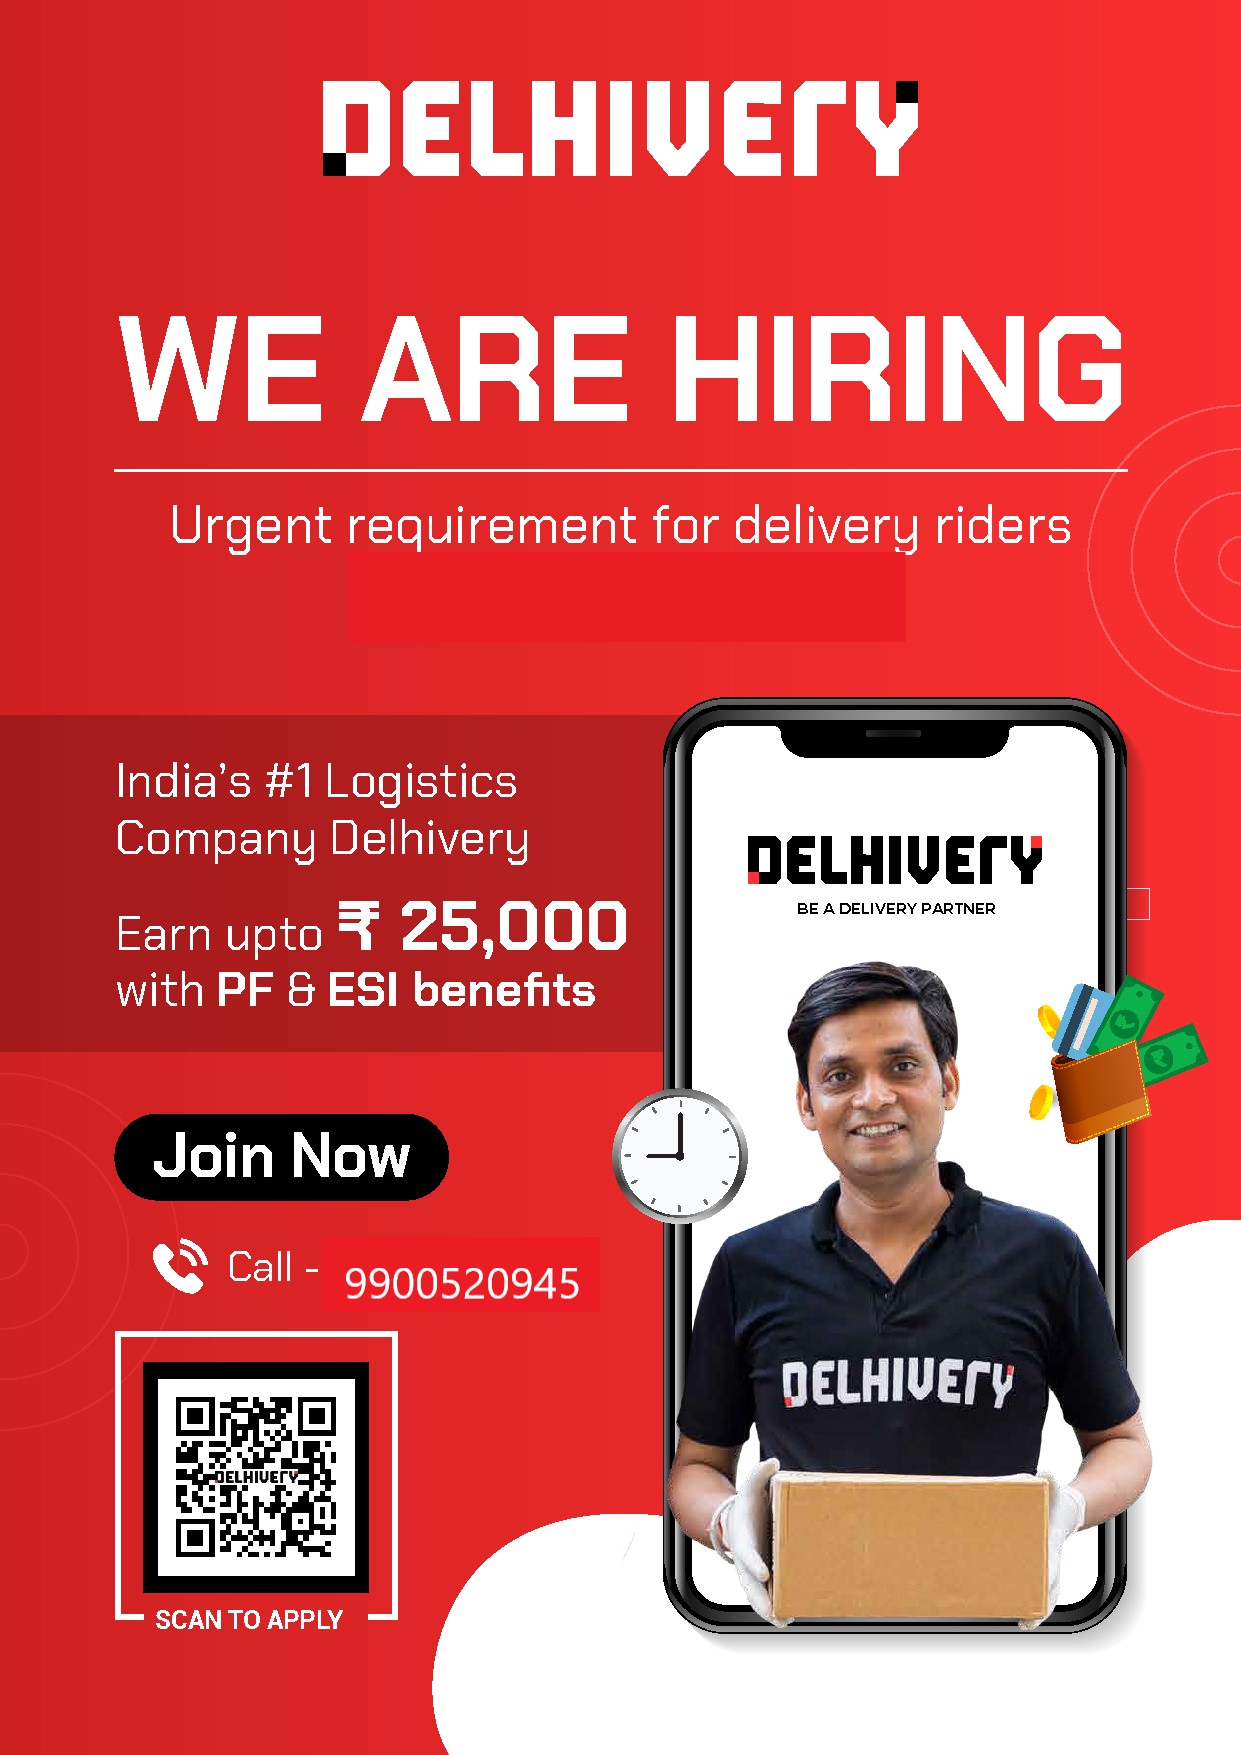 DELHIVETY
WE ARE HIRING

Urgent requirement for delivery riders

   

India’s #1 Logistics
Company Delhivery

Earn upto I 25,000
with PF &amp; ESI benefits

     

DELHIVErY

BE A DELIVERY PARTNER

    
 
 

Join Now

NY
RT EP CY 15

   

SCAN TO APPLY